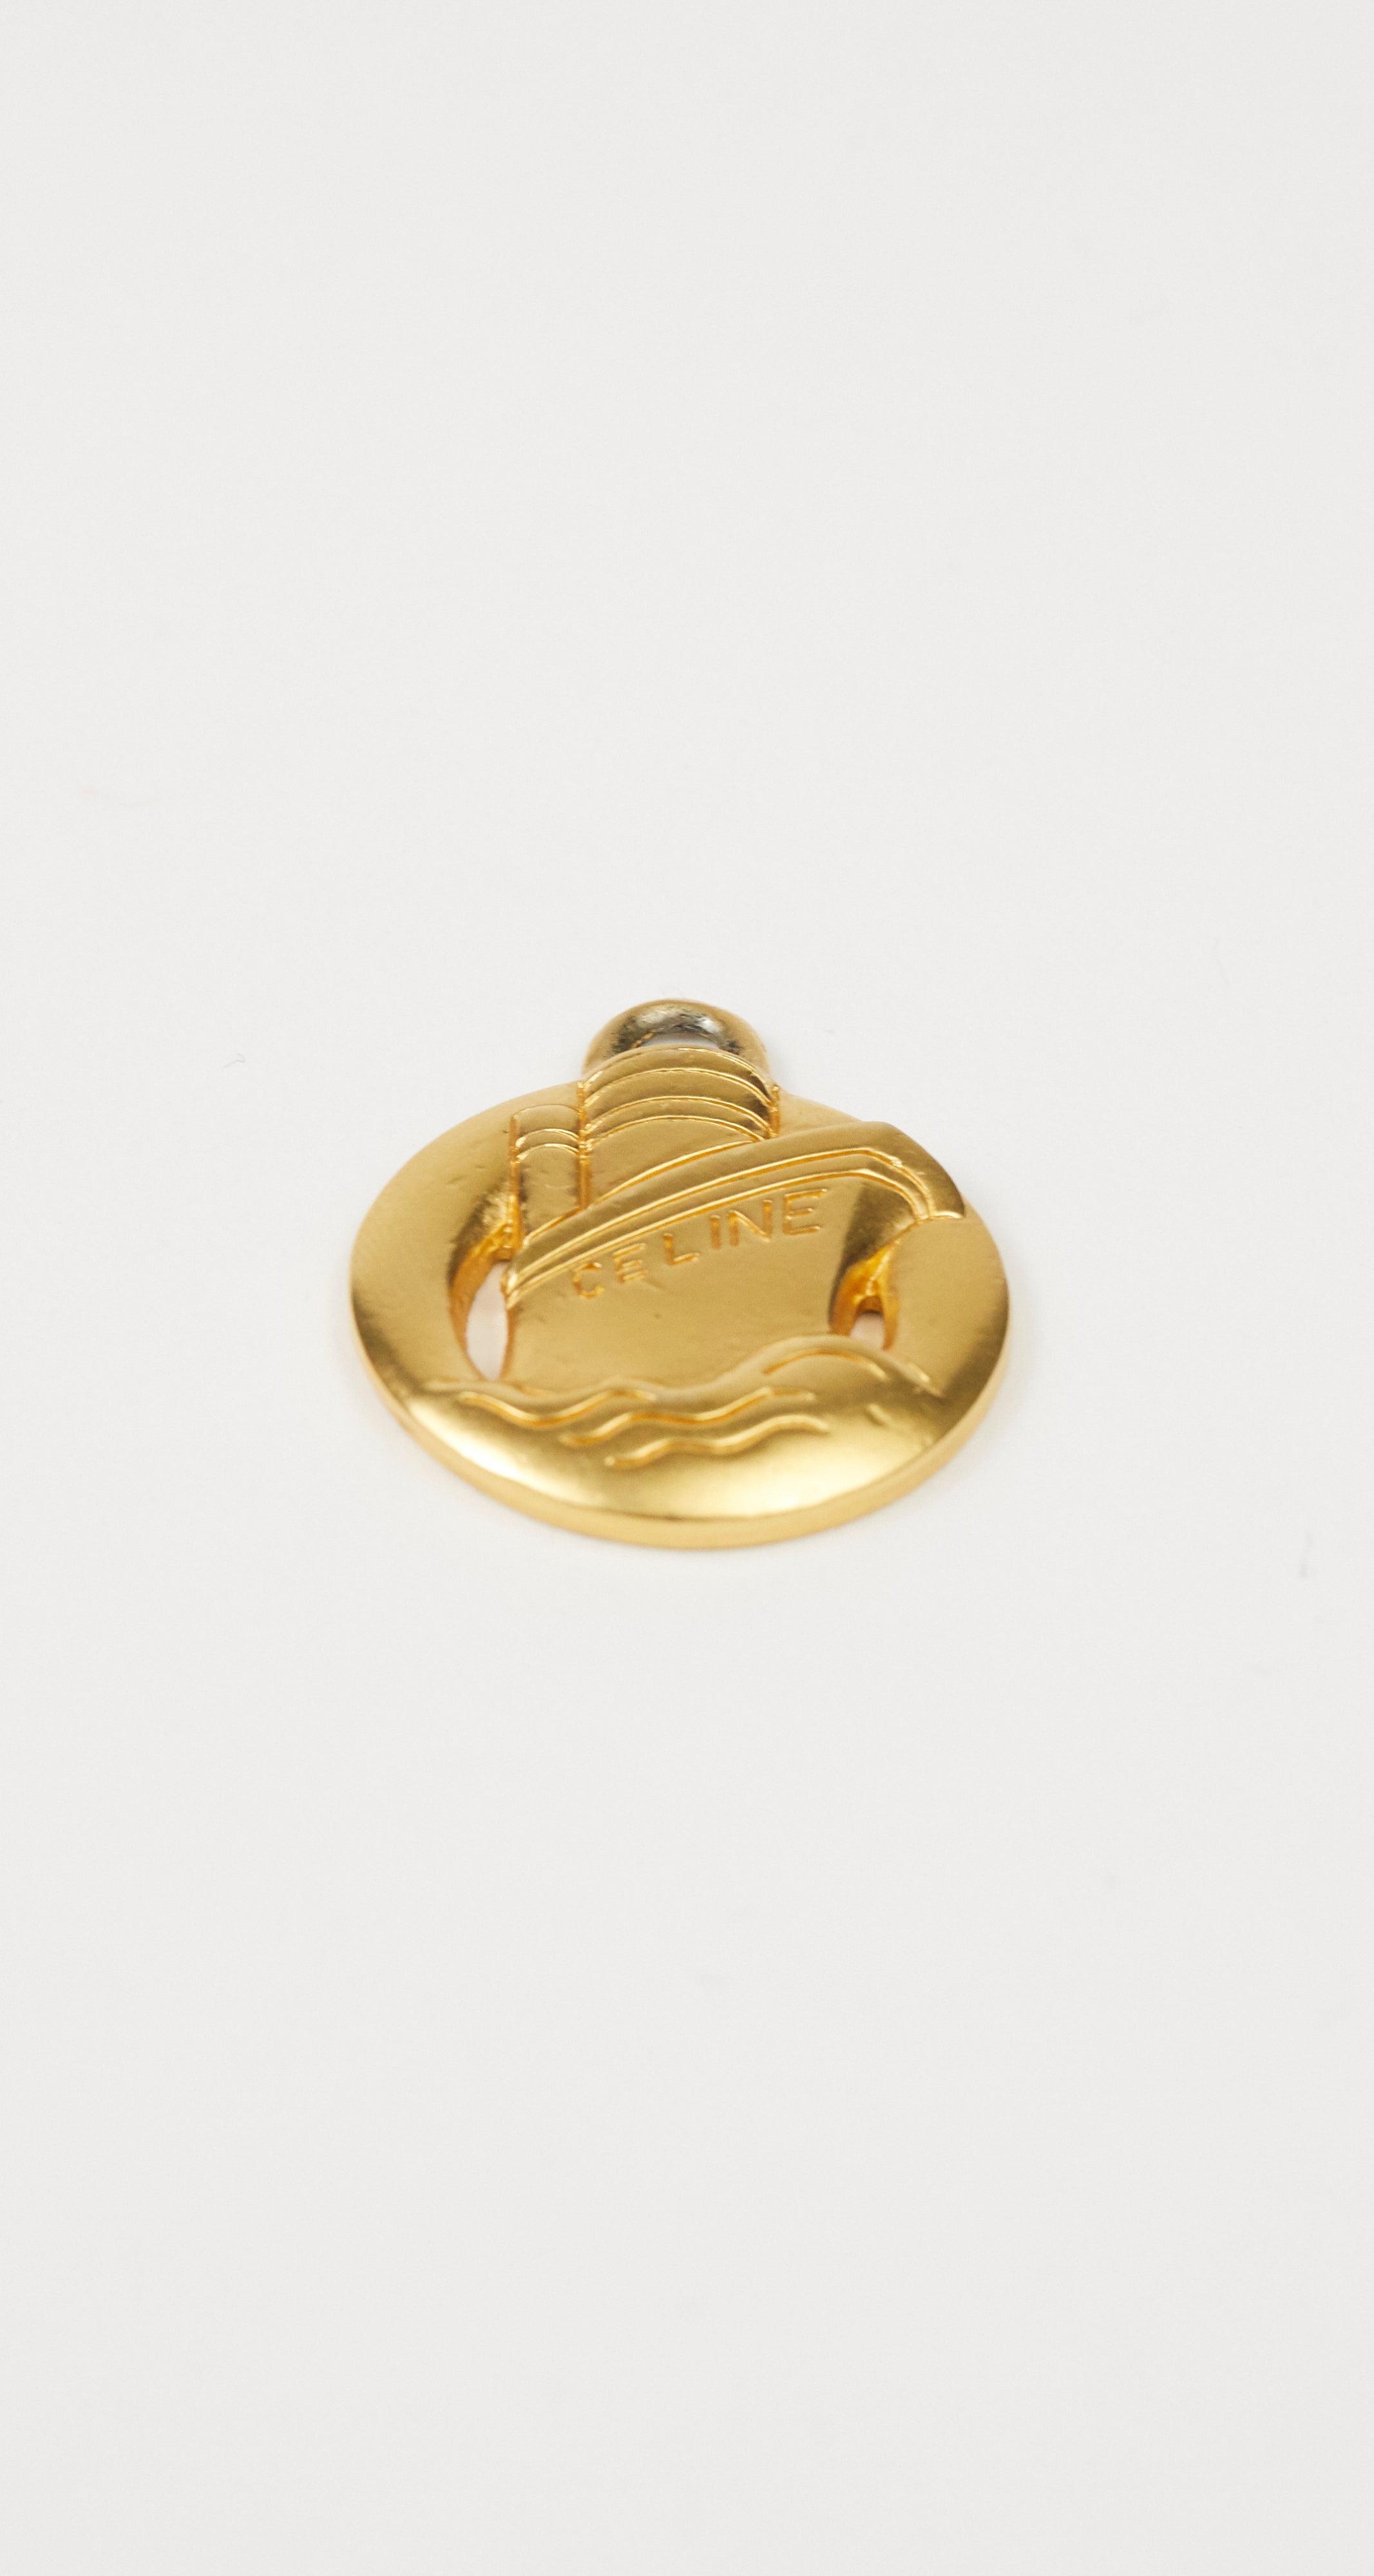 1990s Ship Motif Gold-Plated Pendant Charm